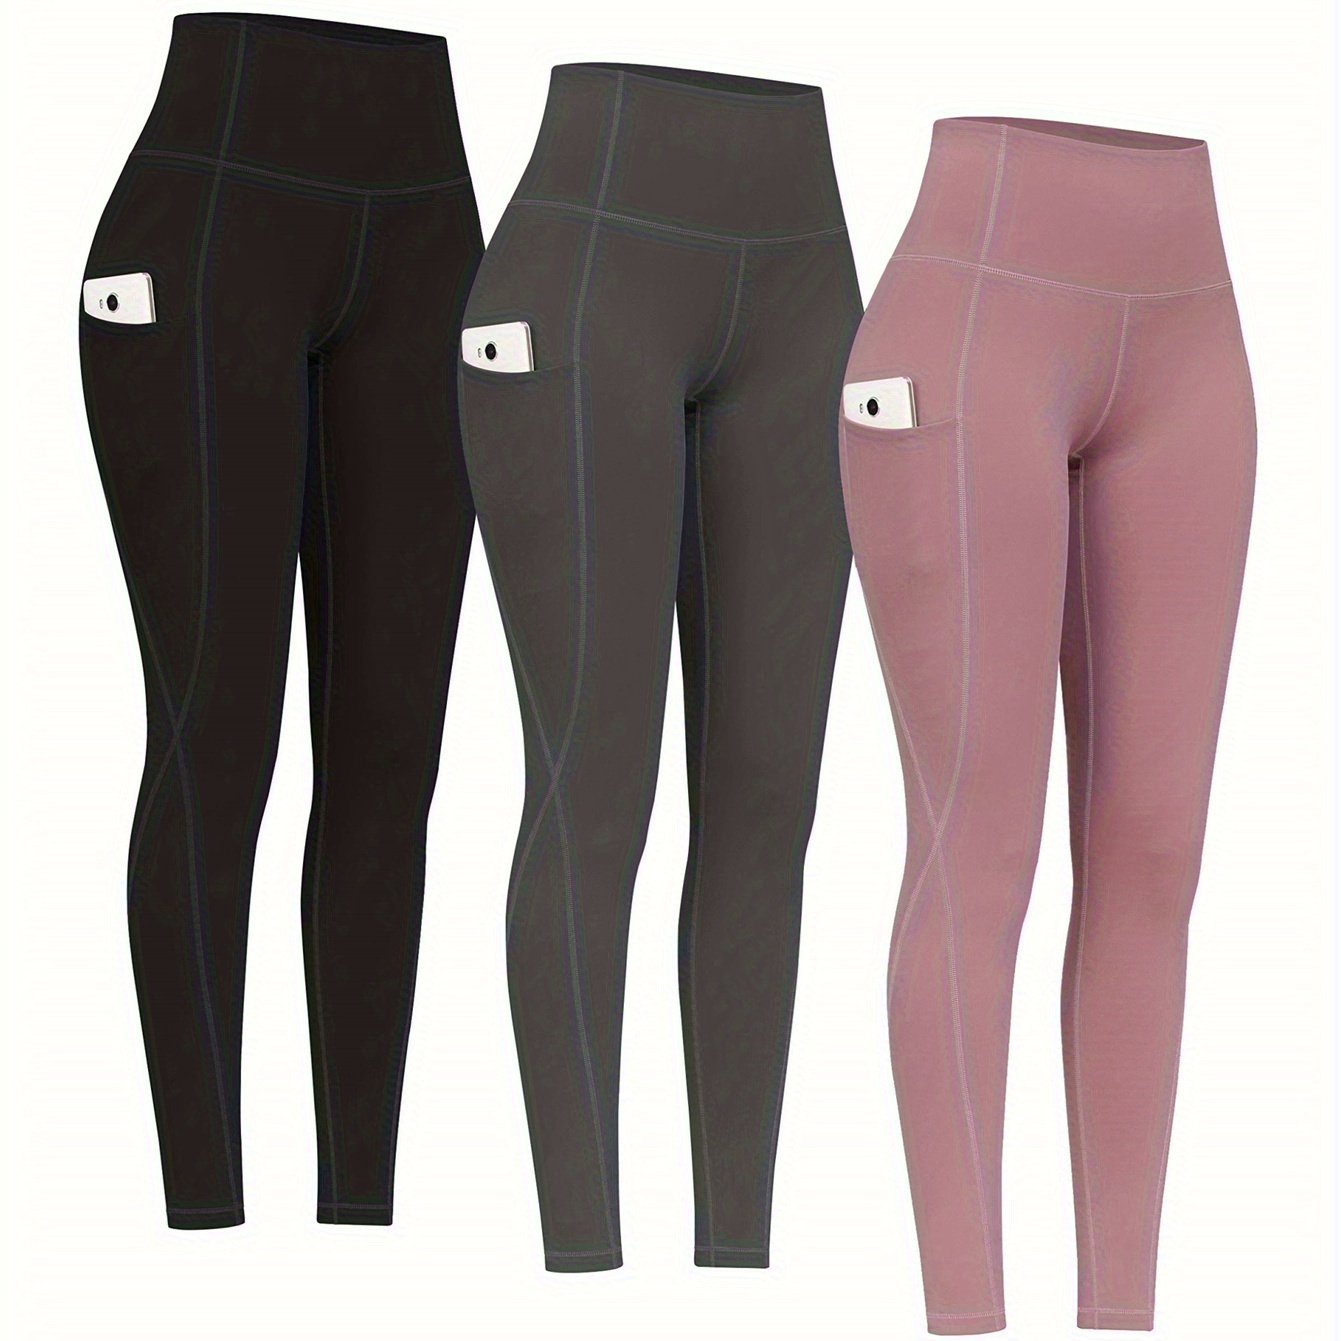 Turn up the summer with high waist leggings armor - CasualFlowshop